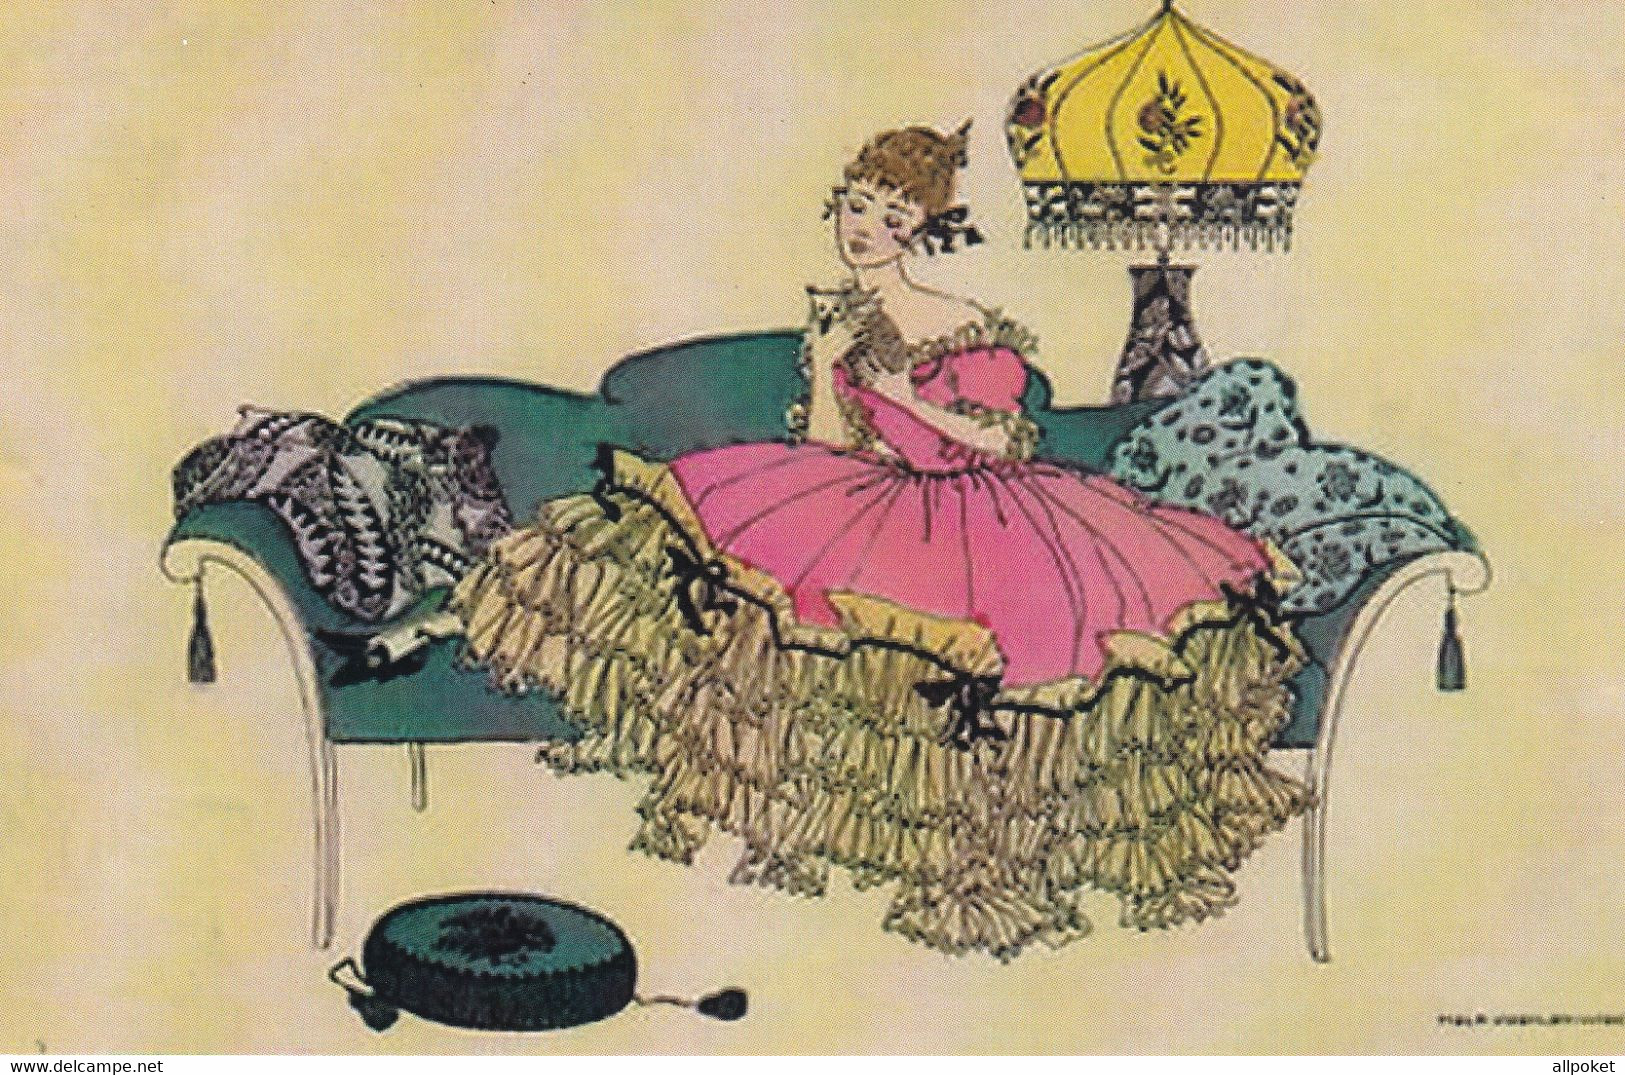 A13725-WOMAN ON THE COUCH ILLUSTRATION SIGNED BY MELA KOEHLER REPRO  POSTCARD - Koehler, Mela